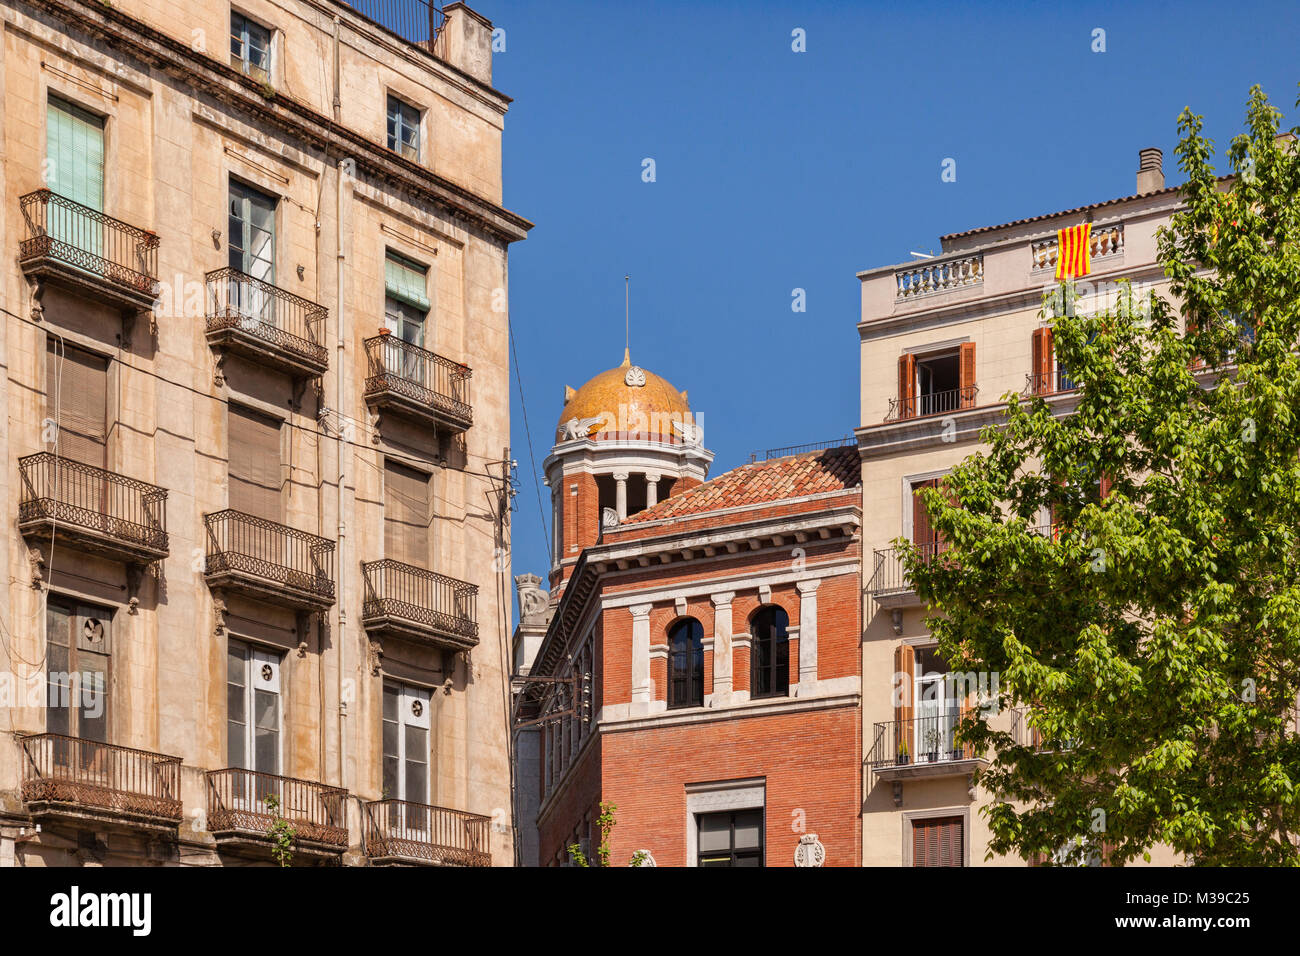 A corner of Placa de la Independencia with the dome of the Post Office, Girona, Catalonia, Spain. Stock Photo